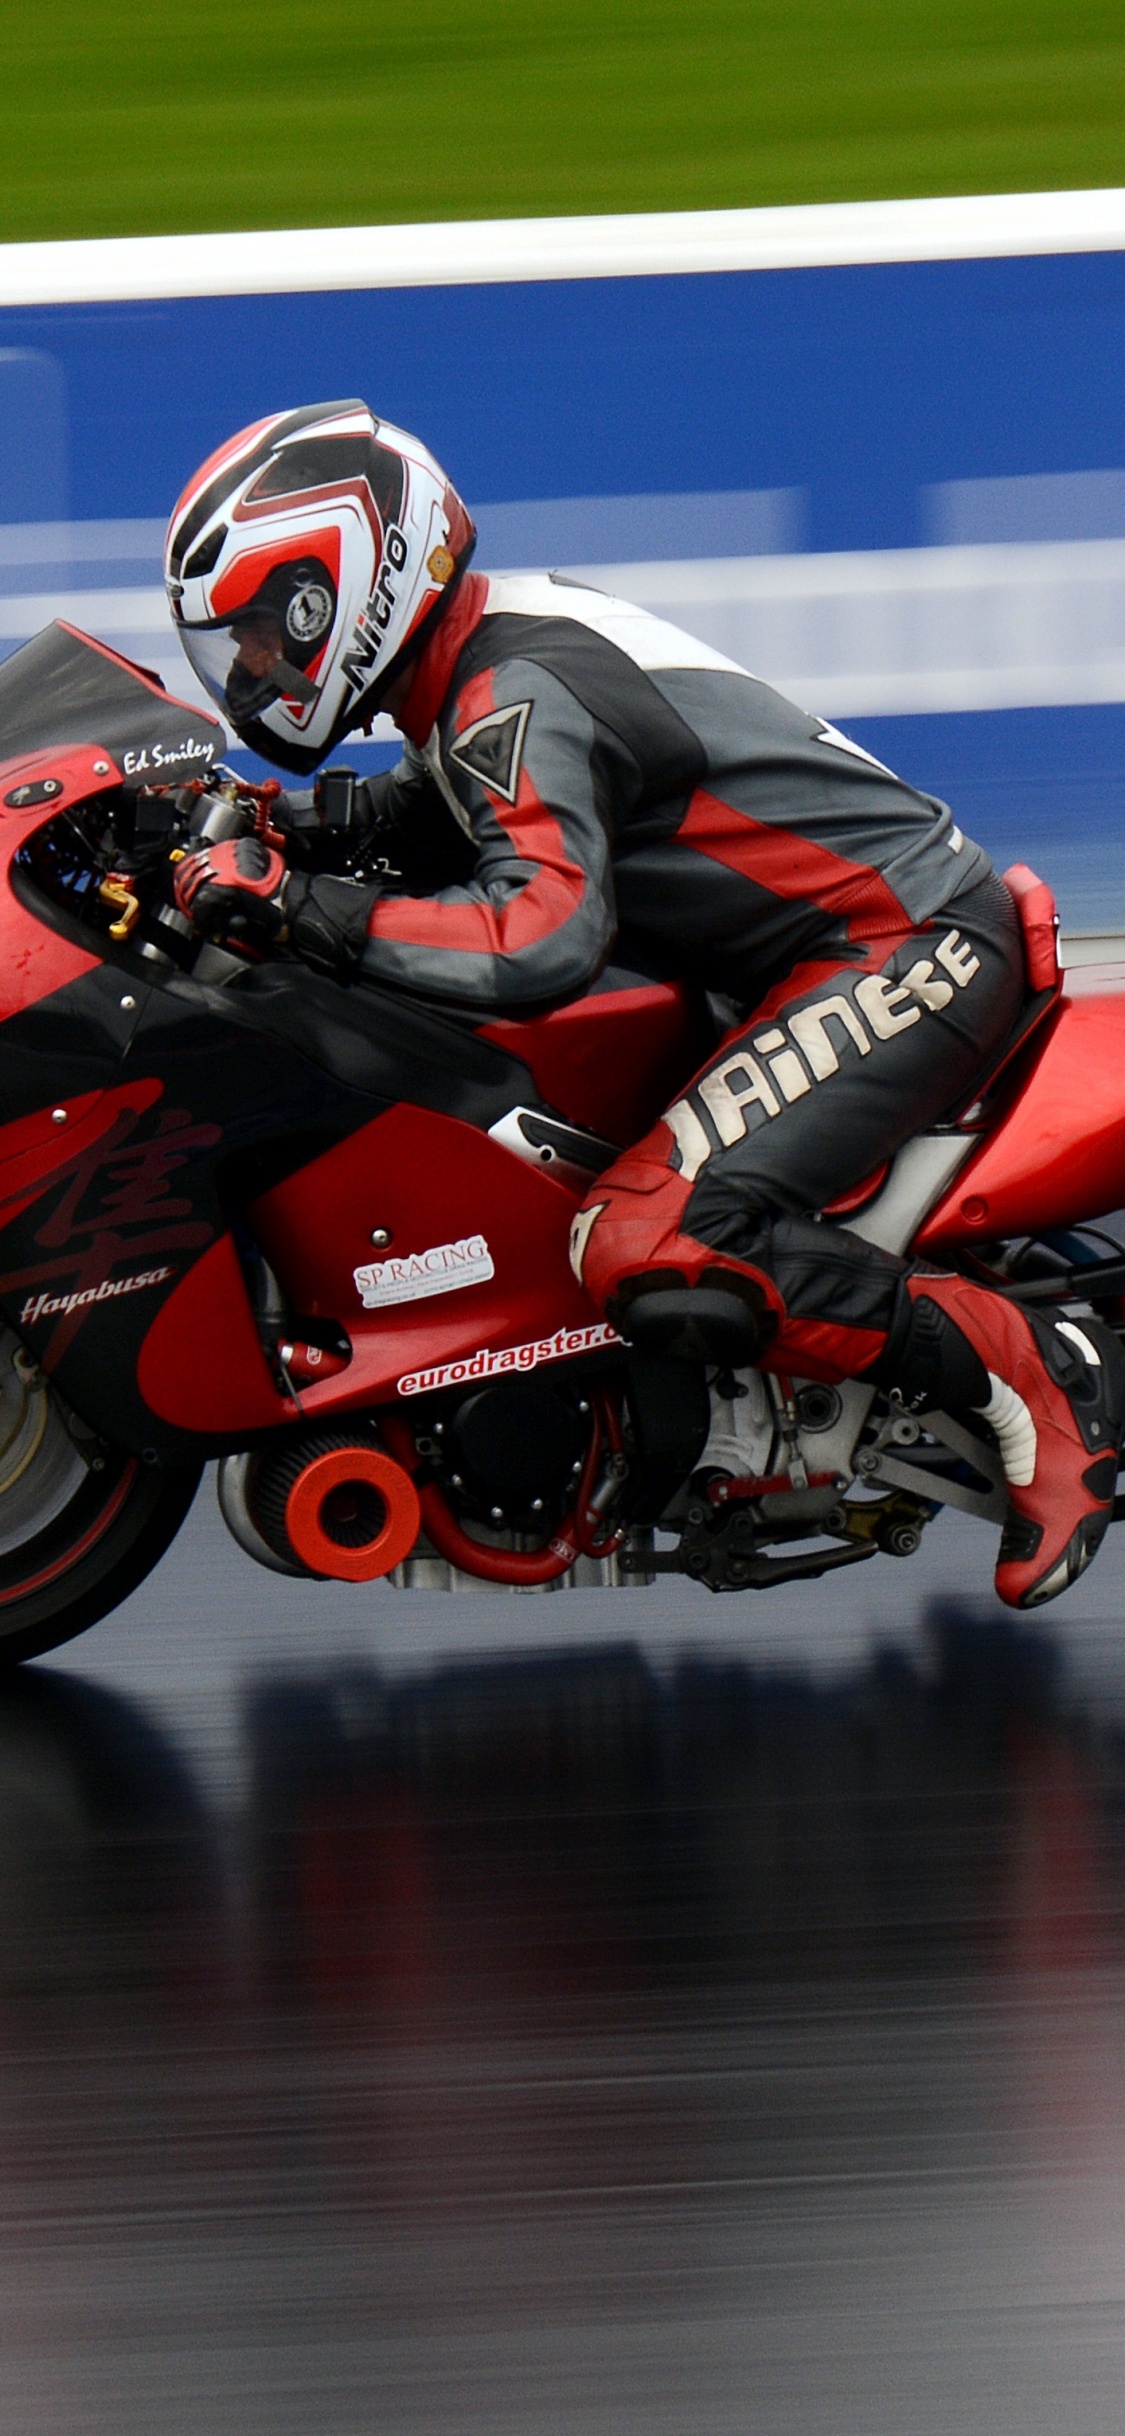 Man in Red and Black Motorcycle Helmet Riding Red Sports Bike. Wallpaper in 1125x2436 Resolution